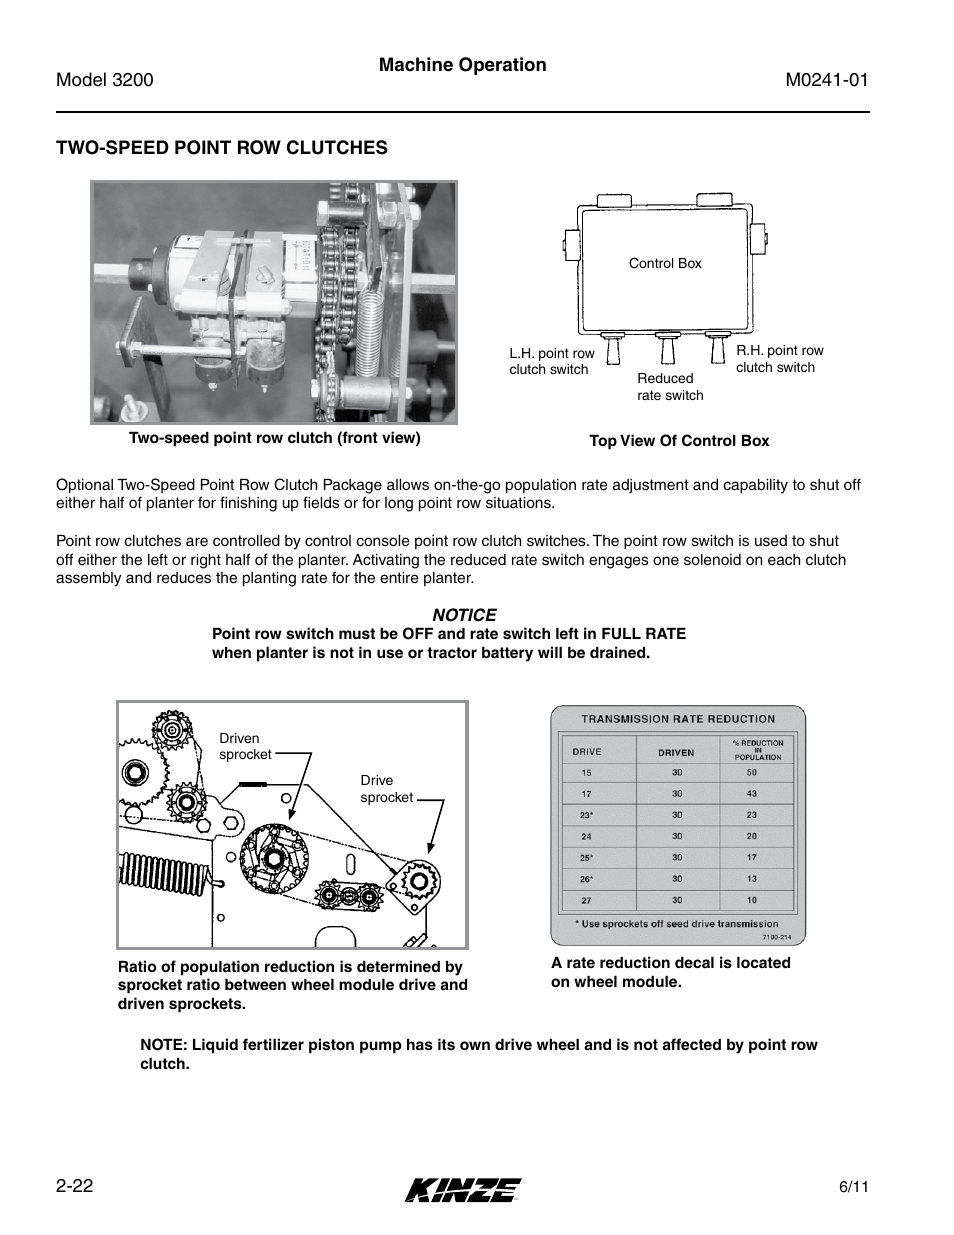 Two-speed point row clutches, Two-speed point row clutches -22 | Kinze 3200 Wing-Fold Planter Rev. 7/14 User Manual | Page 34 / 192